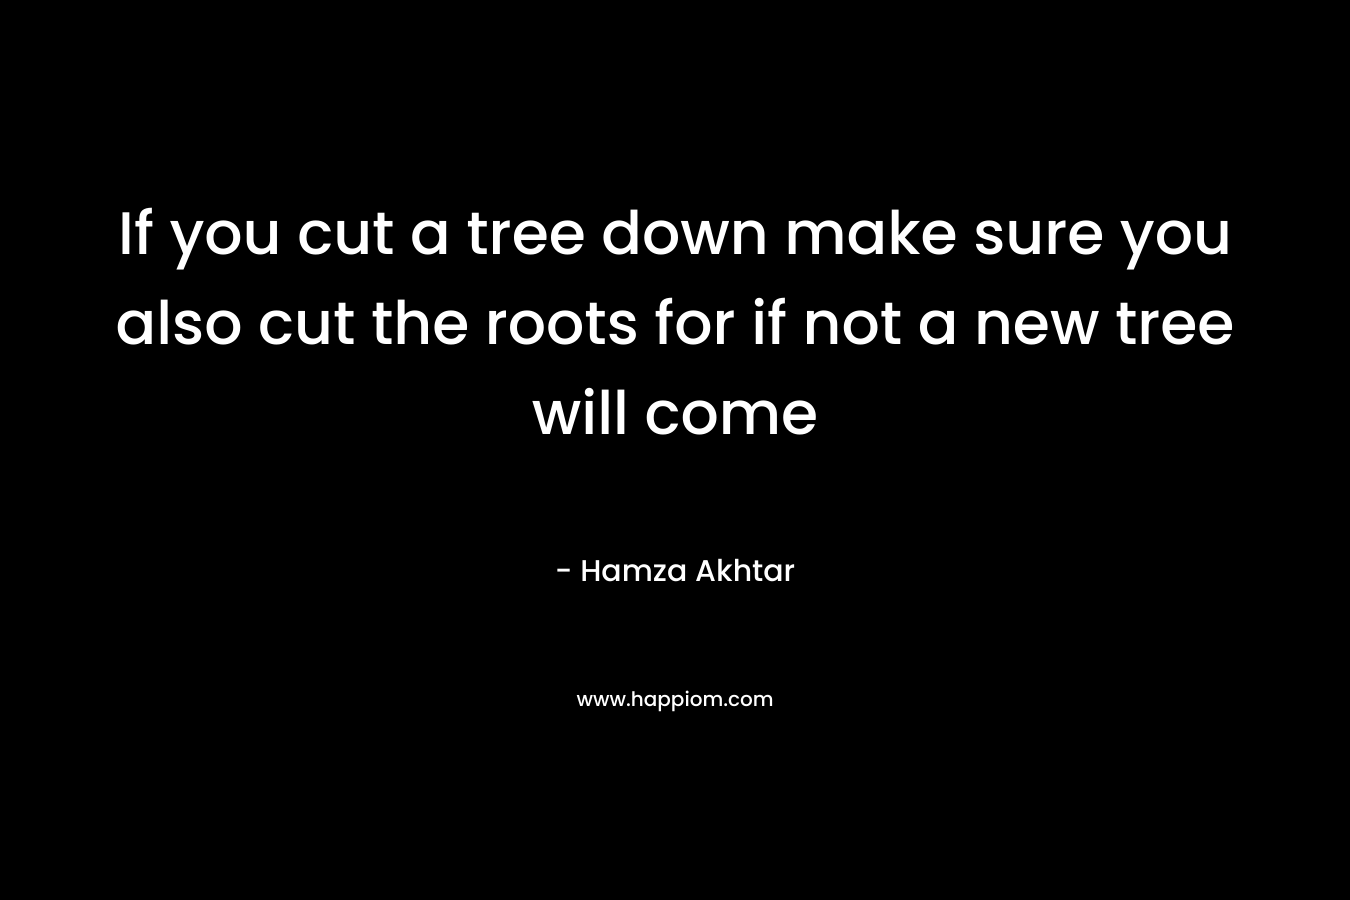 If you cut a tree down make sure you also cut the roots for if not a new tree will come